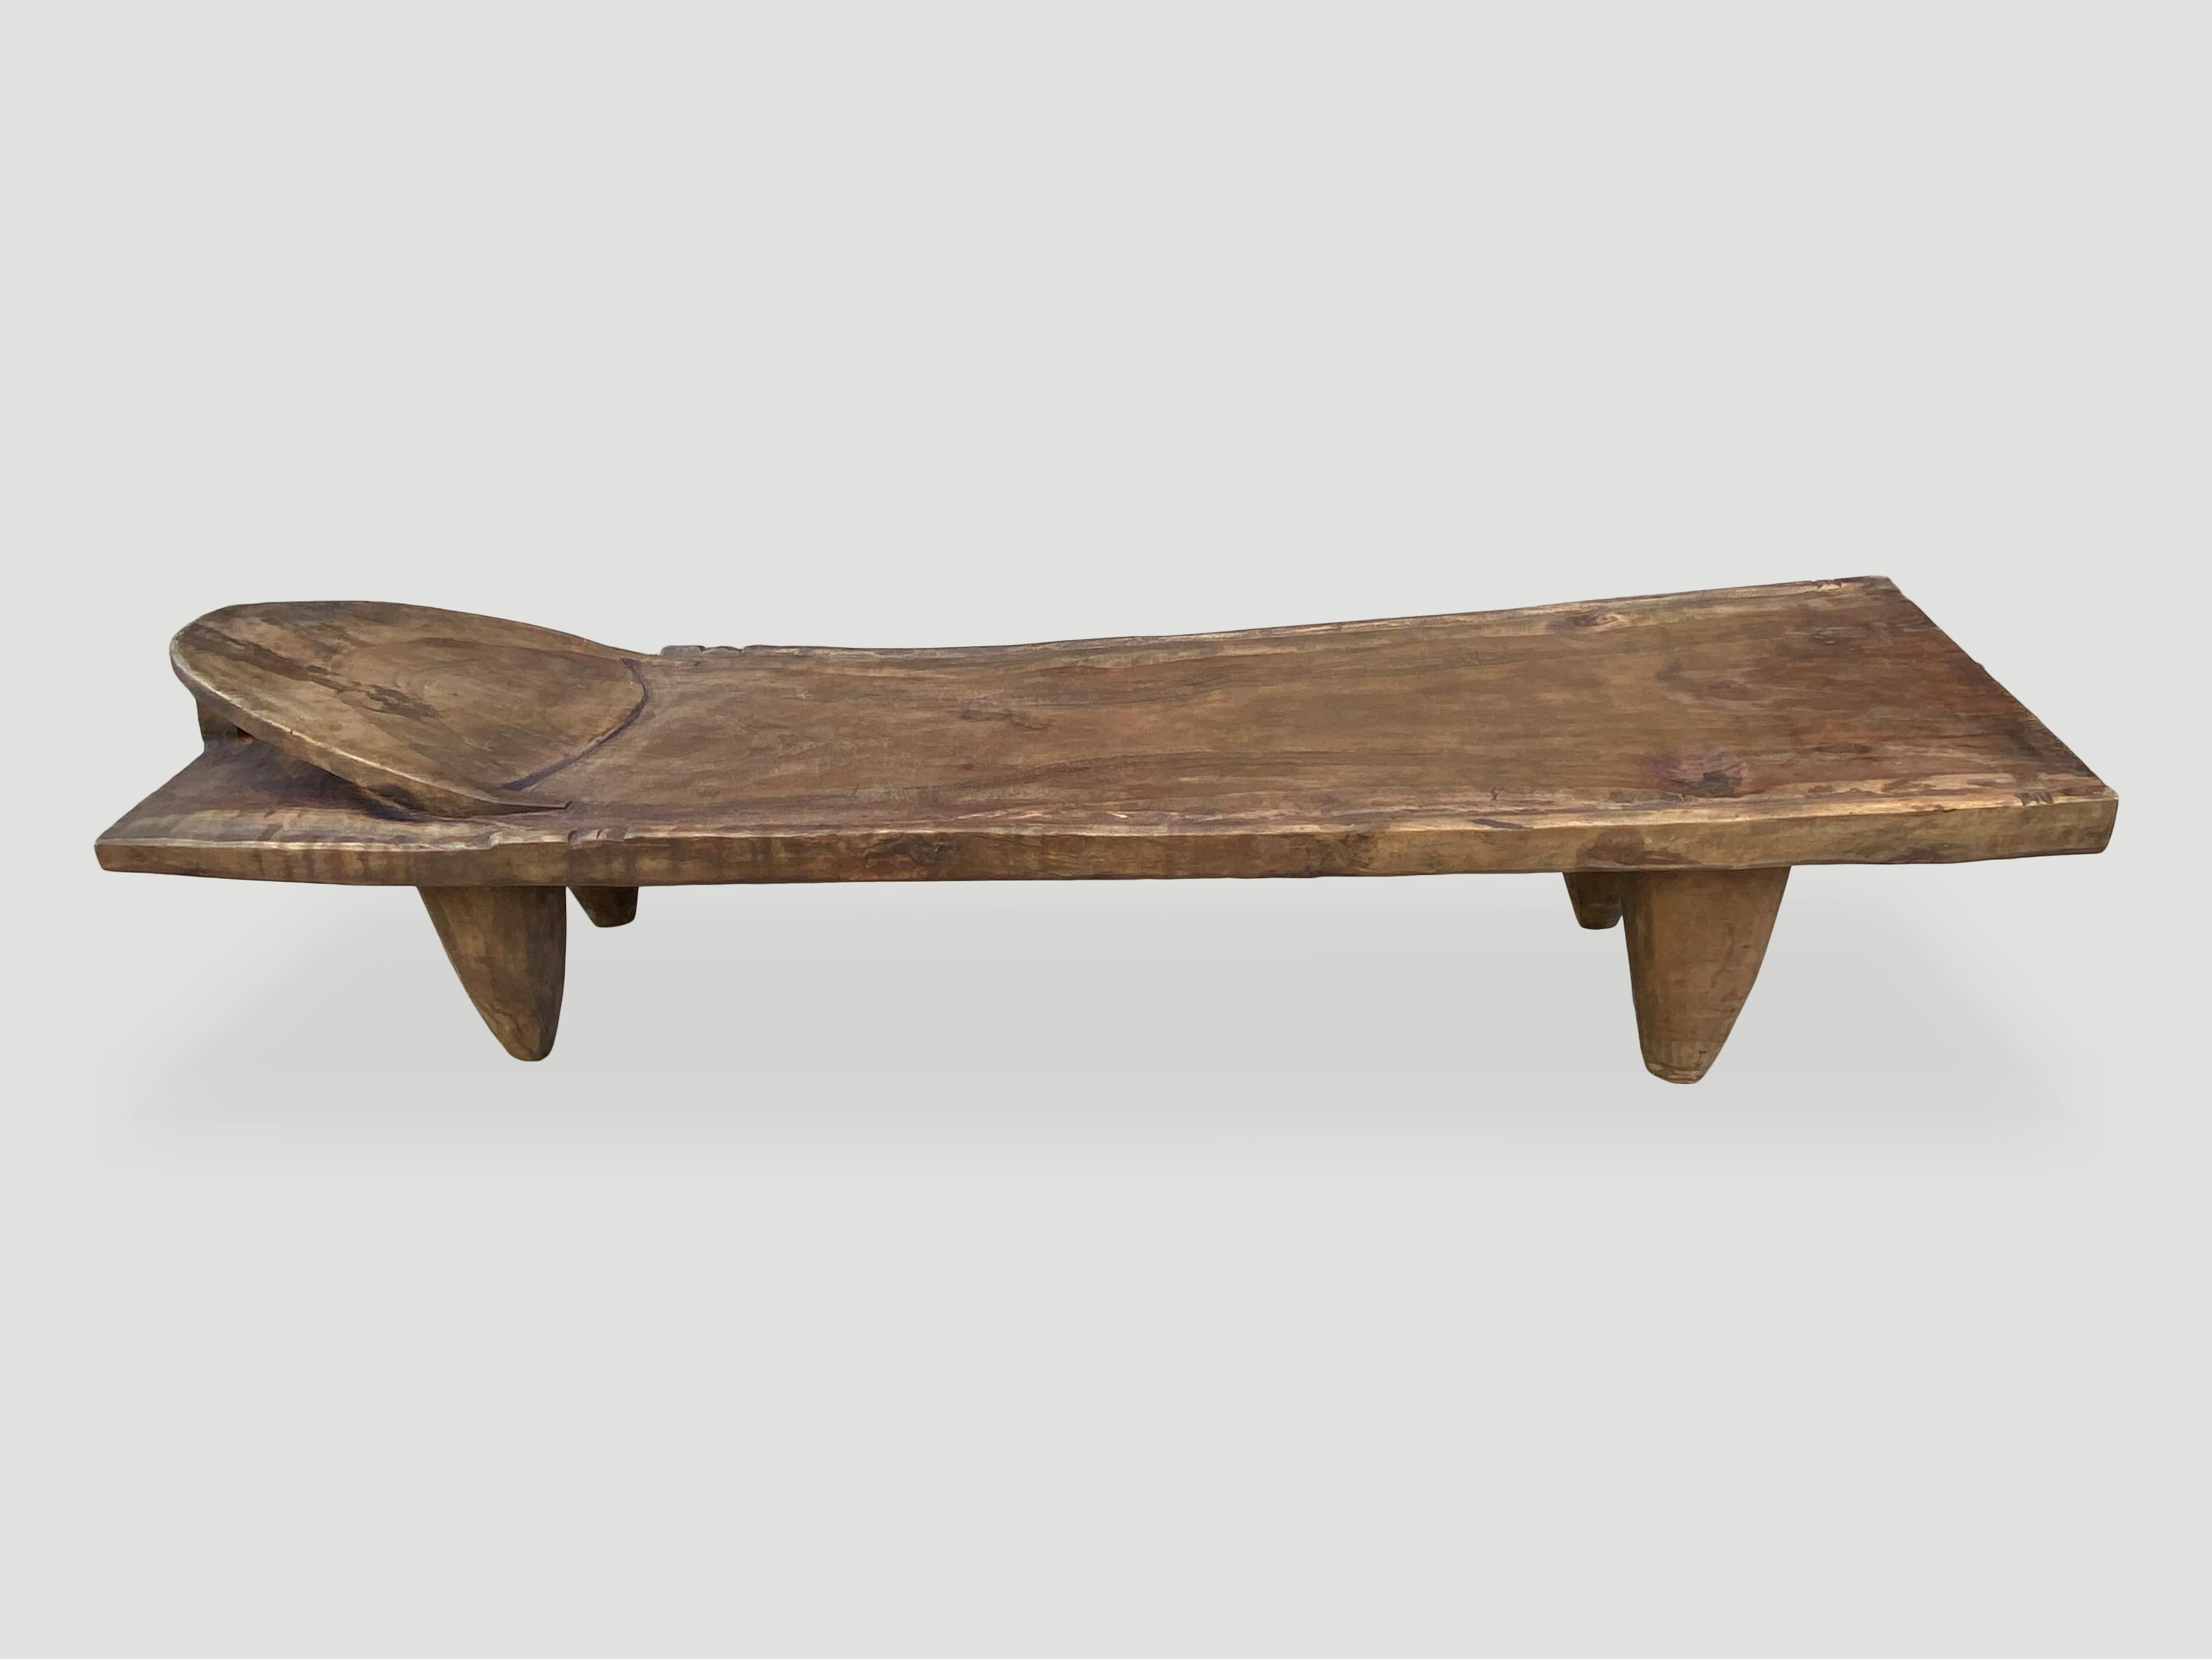 Hand carved by the Senufo tribes from a single block of iroko wood, native to the west coast of Africa. The wood is tough, dense and very durable. Shown with cone style legs and a raised five inch headrest. Originally used as a bed, that can now be